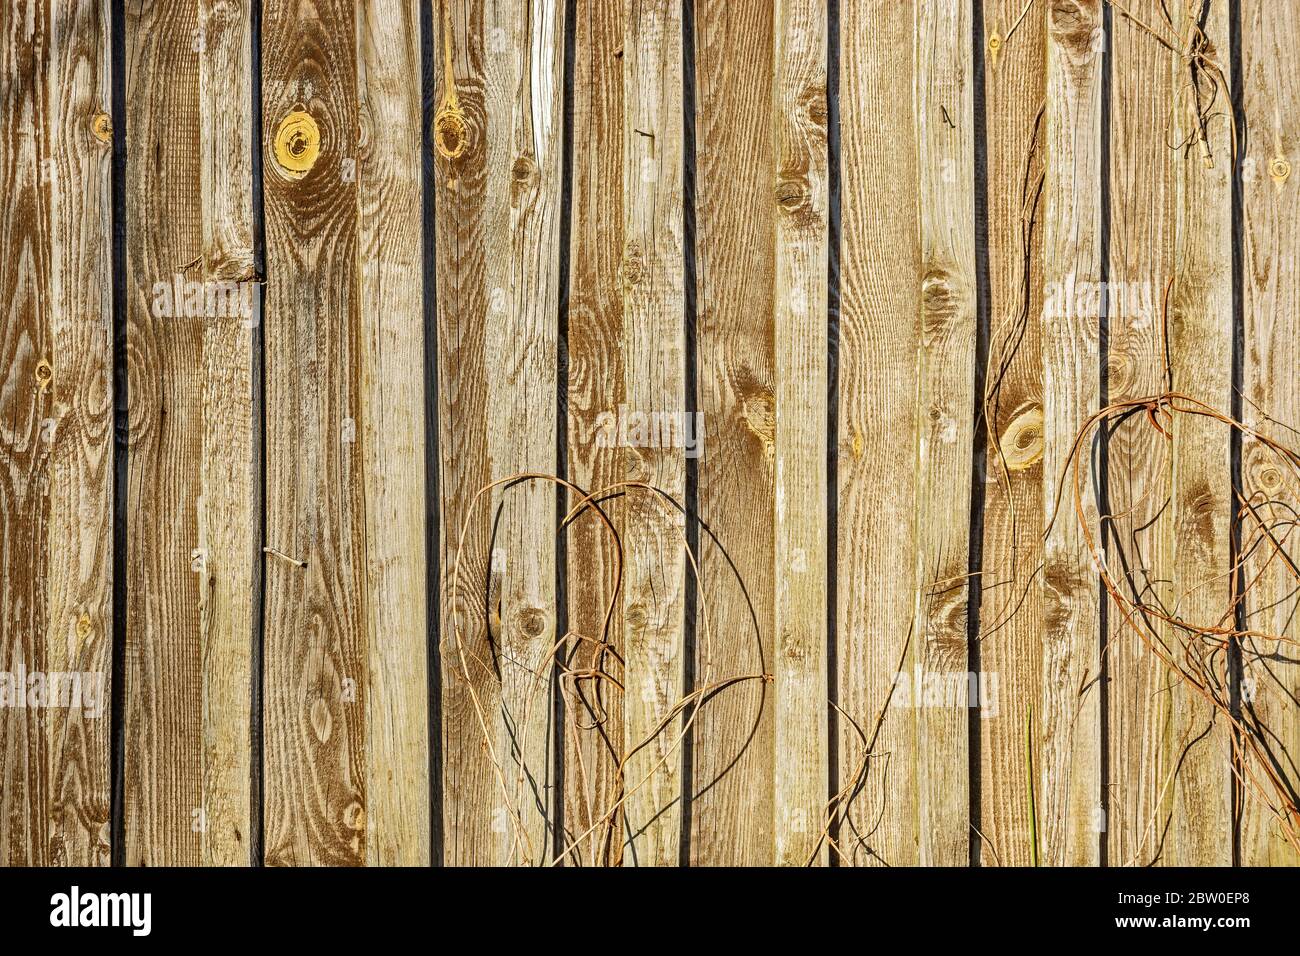 Fragment of a wall of wooden slats and boards with dry plant stems. For use as an abstract background. Stock Photo